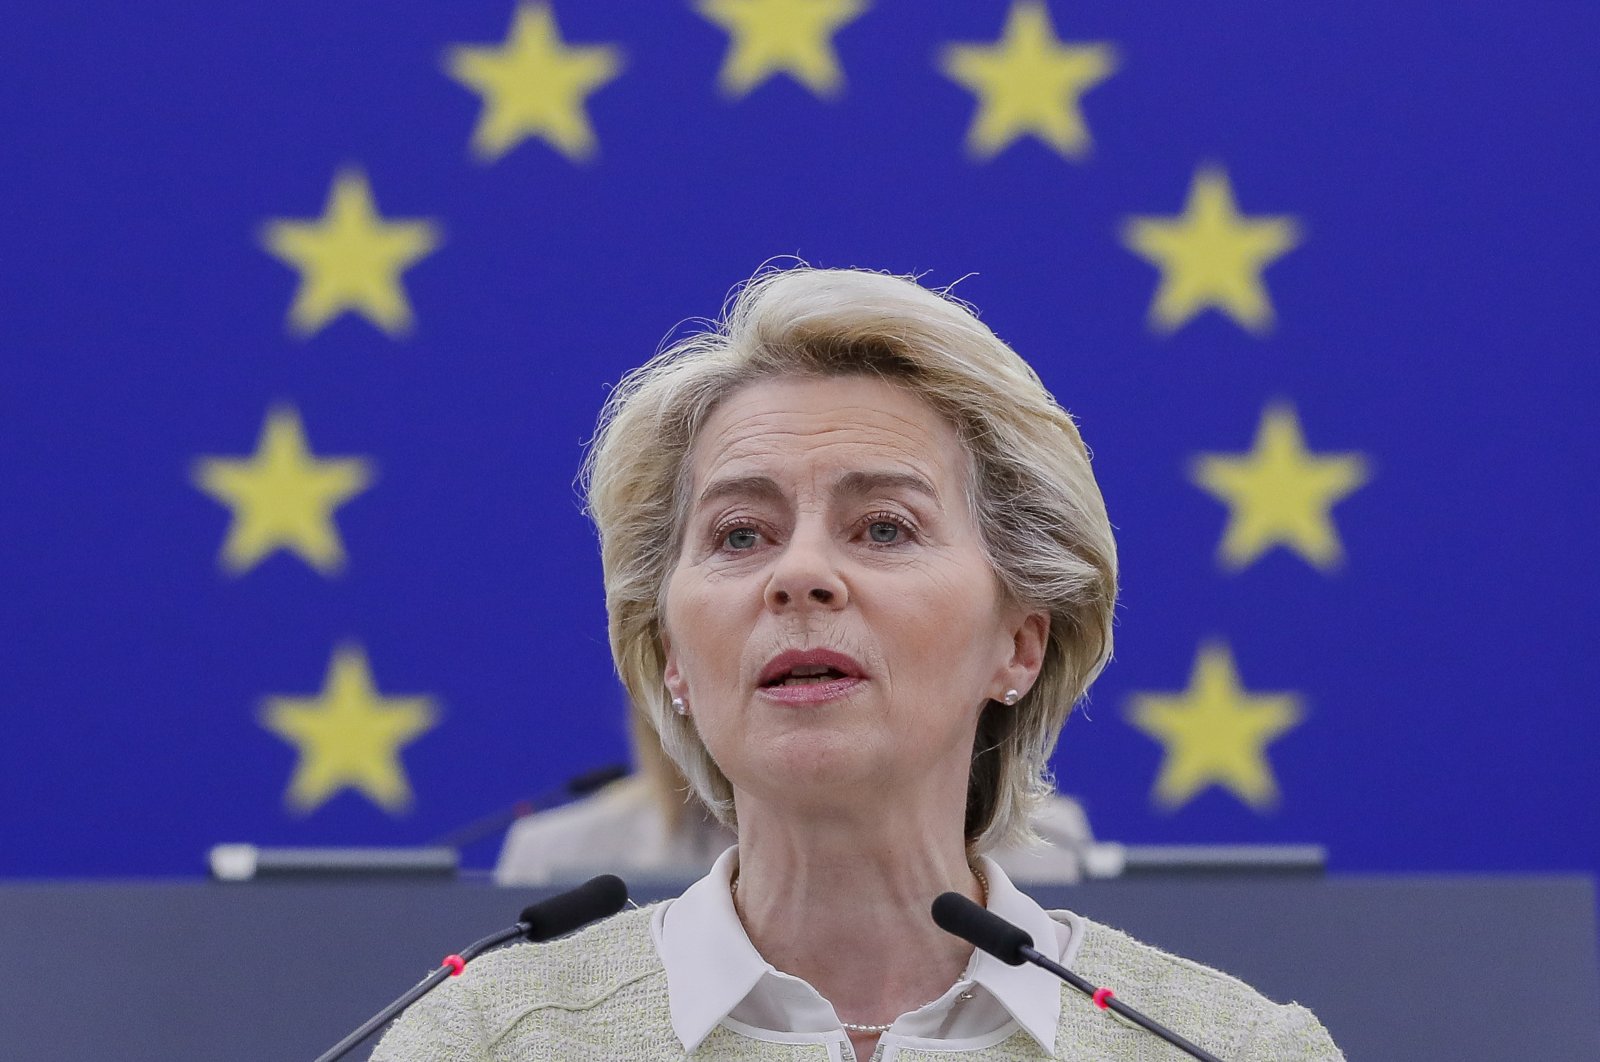 European Commission President Ursula von der Leyen delivers a speech on the social and economic consequences of the Russian invasion of Ukraine for the EU at the European Parliament in Strasbourg, France, May 4, 2022. (EPA Photo)